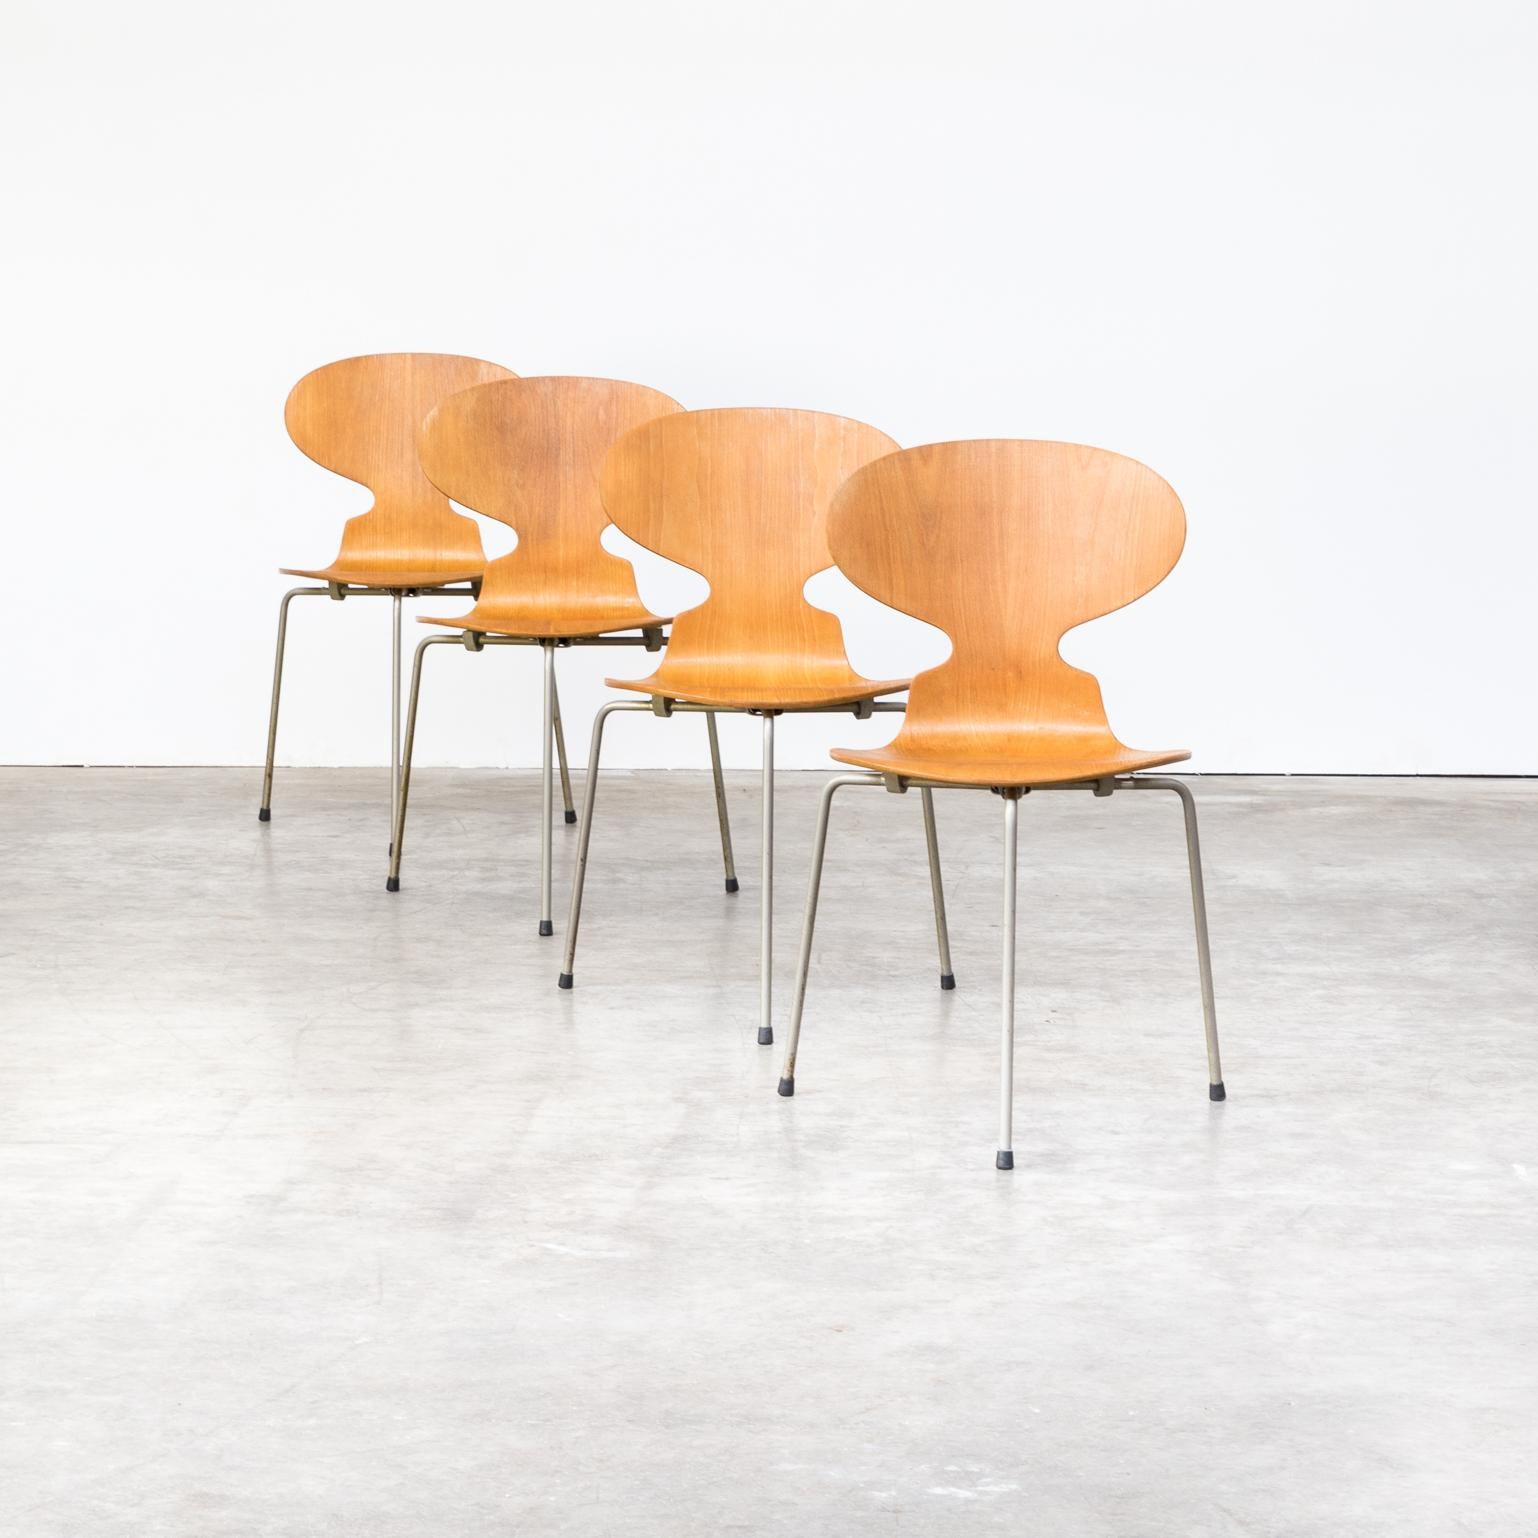 1950s Arne Jacobsen plywood original ‘model 3100 Ant’ chair for Fritz Hanzen set of 4. Arne Jacobsen originally designed the Ant stackable chairs for the canteen at Danish healthcare company 'Novo Nordisk'. Tripod and later with four legs. Design